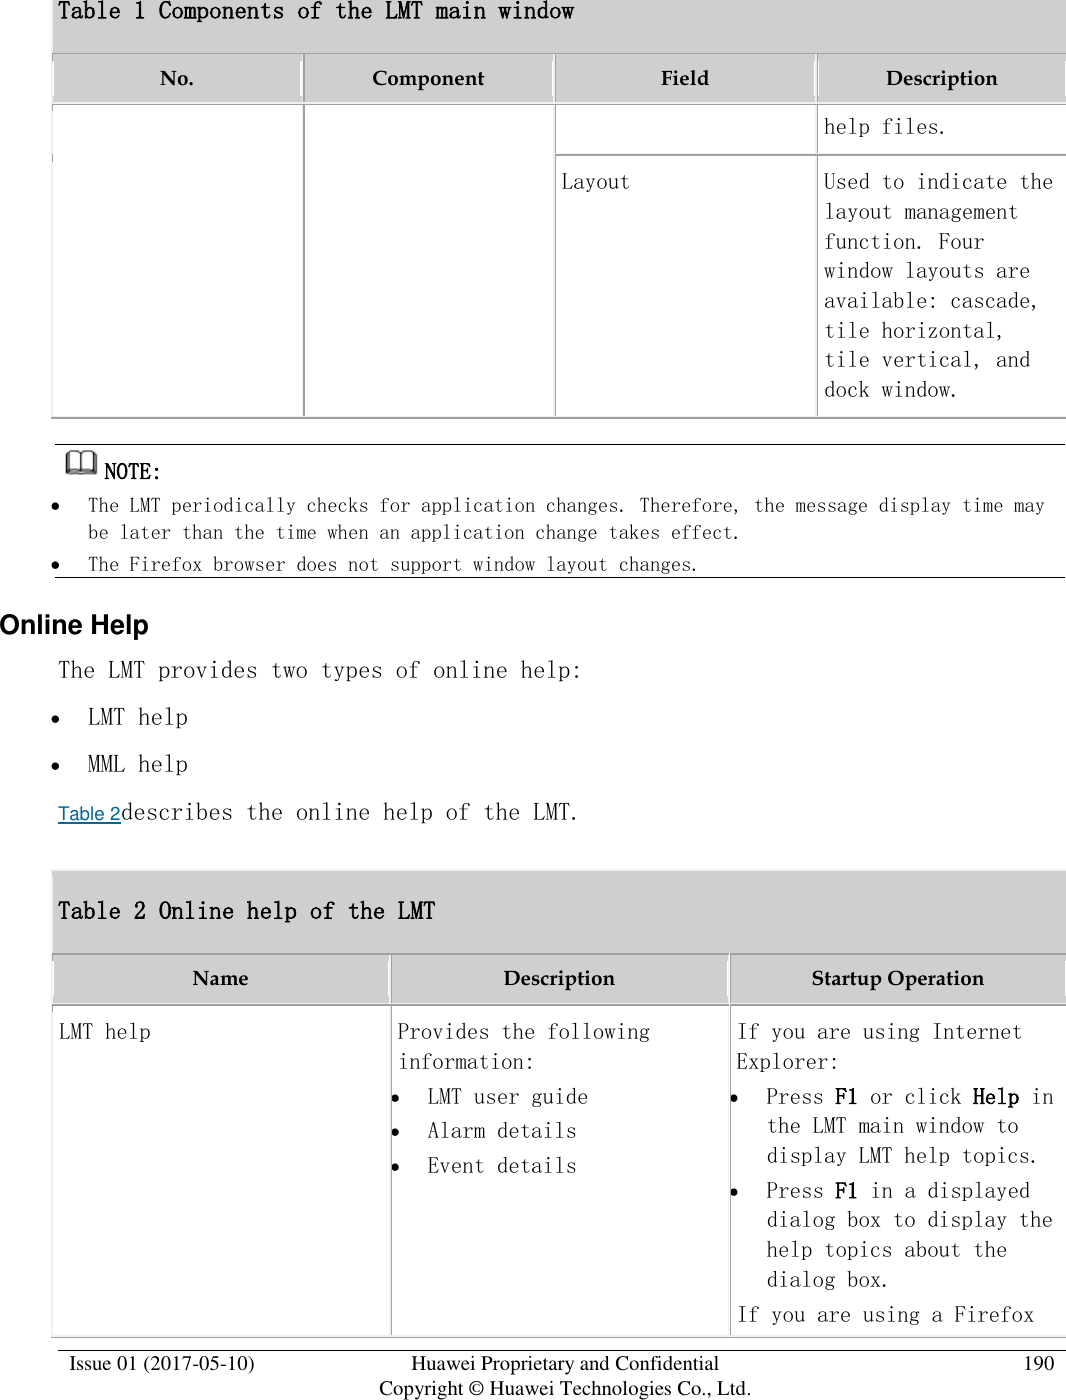  Issue 01 (2017-05-10) Huawei Proprietary and Confidential      Copyright © Huawei Technologies Co., Ltd. 190  Table 1 Components of the LMT main window No. Component Field Description help files. Layout Used to indicate the layout management function. Four window layouts are available: cascade, tile horizontal, tile vertical, and dock window. NOTE:   The LMT periodically checks for application changes. Therefore, the message display time may be later than the time when an application change takes effect.  The Firefox browser does not support window layout changes. Online Help The LMT provides two types of online help:   LMT help  MML help Table 2describes the online help of the LMT. Table 2 Online help of the LMT Name Description Startup Operation LMT help Provides the following information:   LMT user guide  Alarm details  Event details If you are using Internet Explorer:   Press F1 or click Help in the LMT main window to display LMT help topics.  Press F1 in a displayed dialog box to display the help topics about the dialog box. If you are using a Firefox 